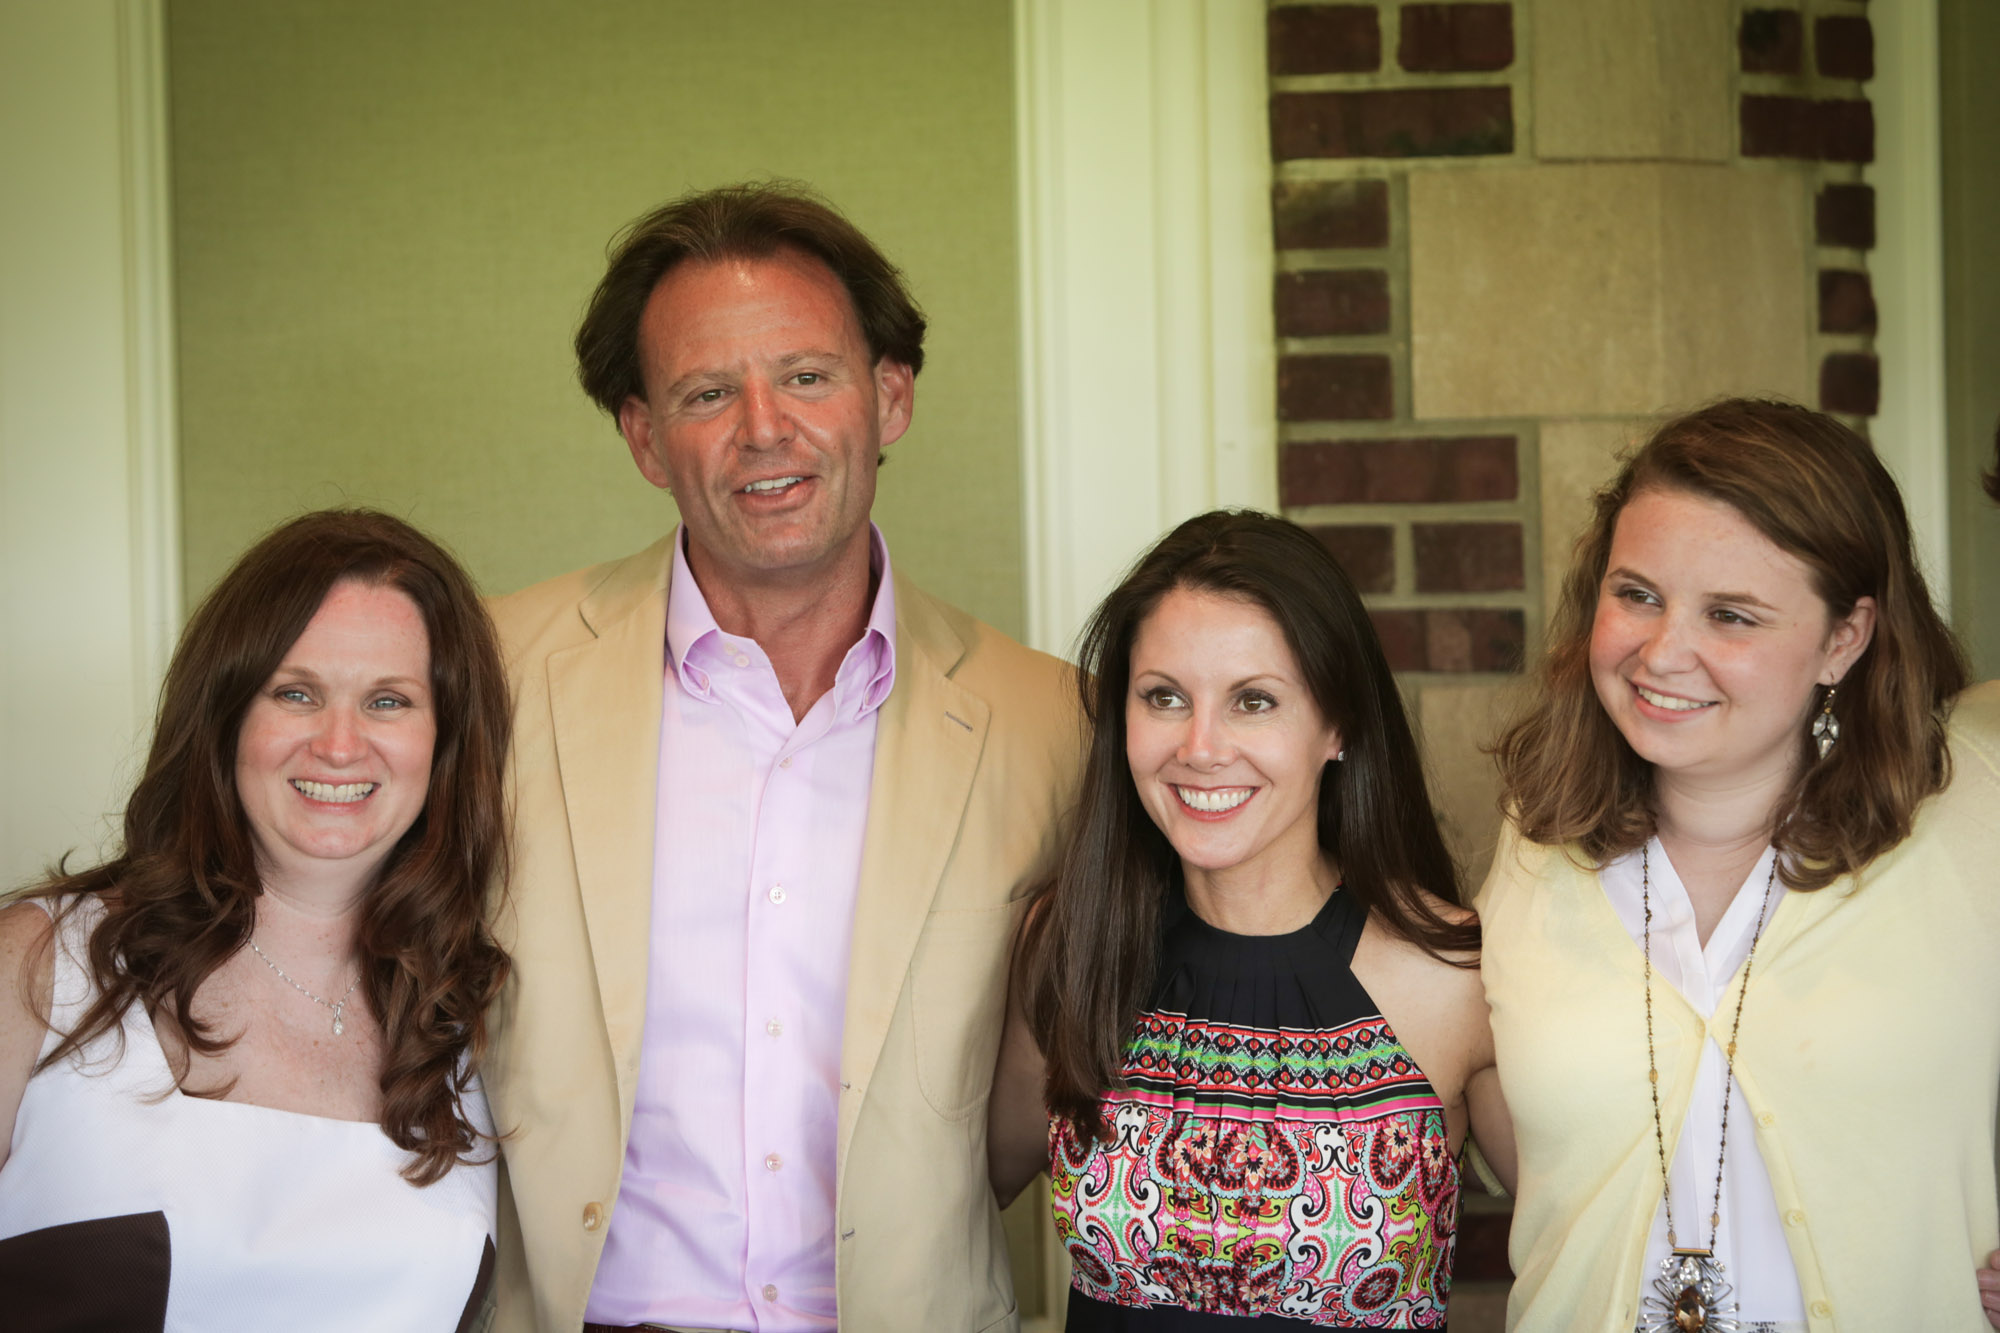 From Left to Right - Suzanne Citron, co-founder of the Charles Lafitte Foundation; Jeffrey Citron, co-founder of the Charles Lafitte Foundation; Jennifer Vertetis, president of the Charles Lafitte Fou